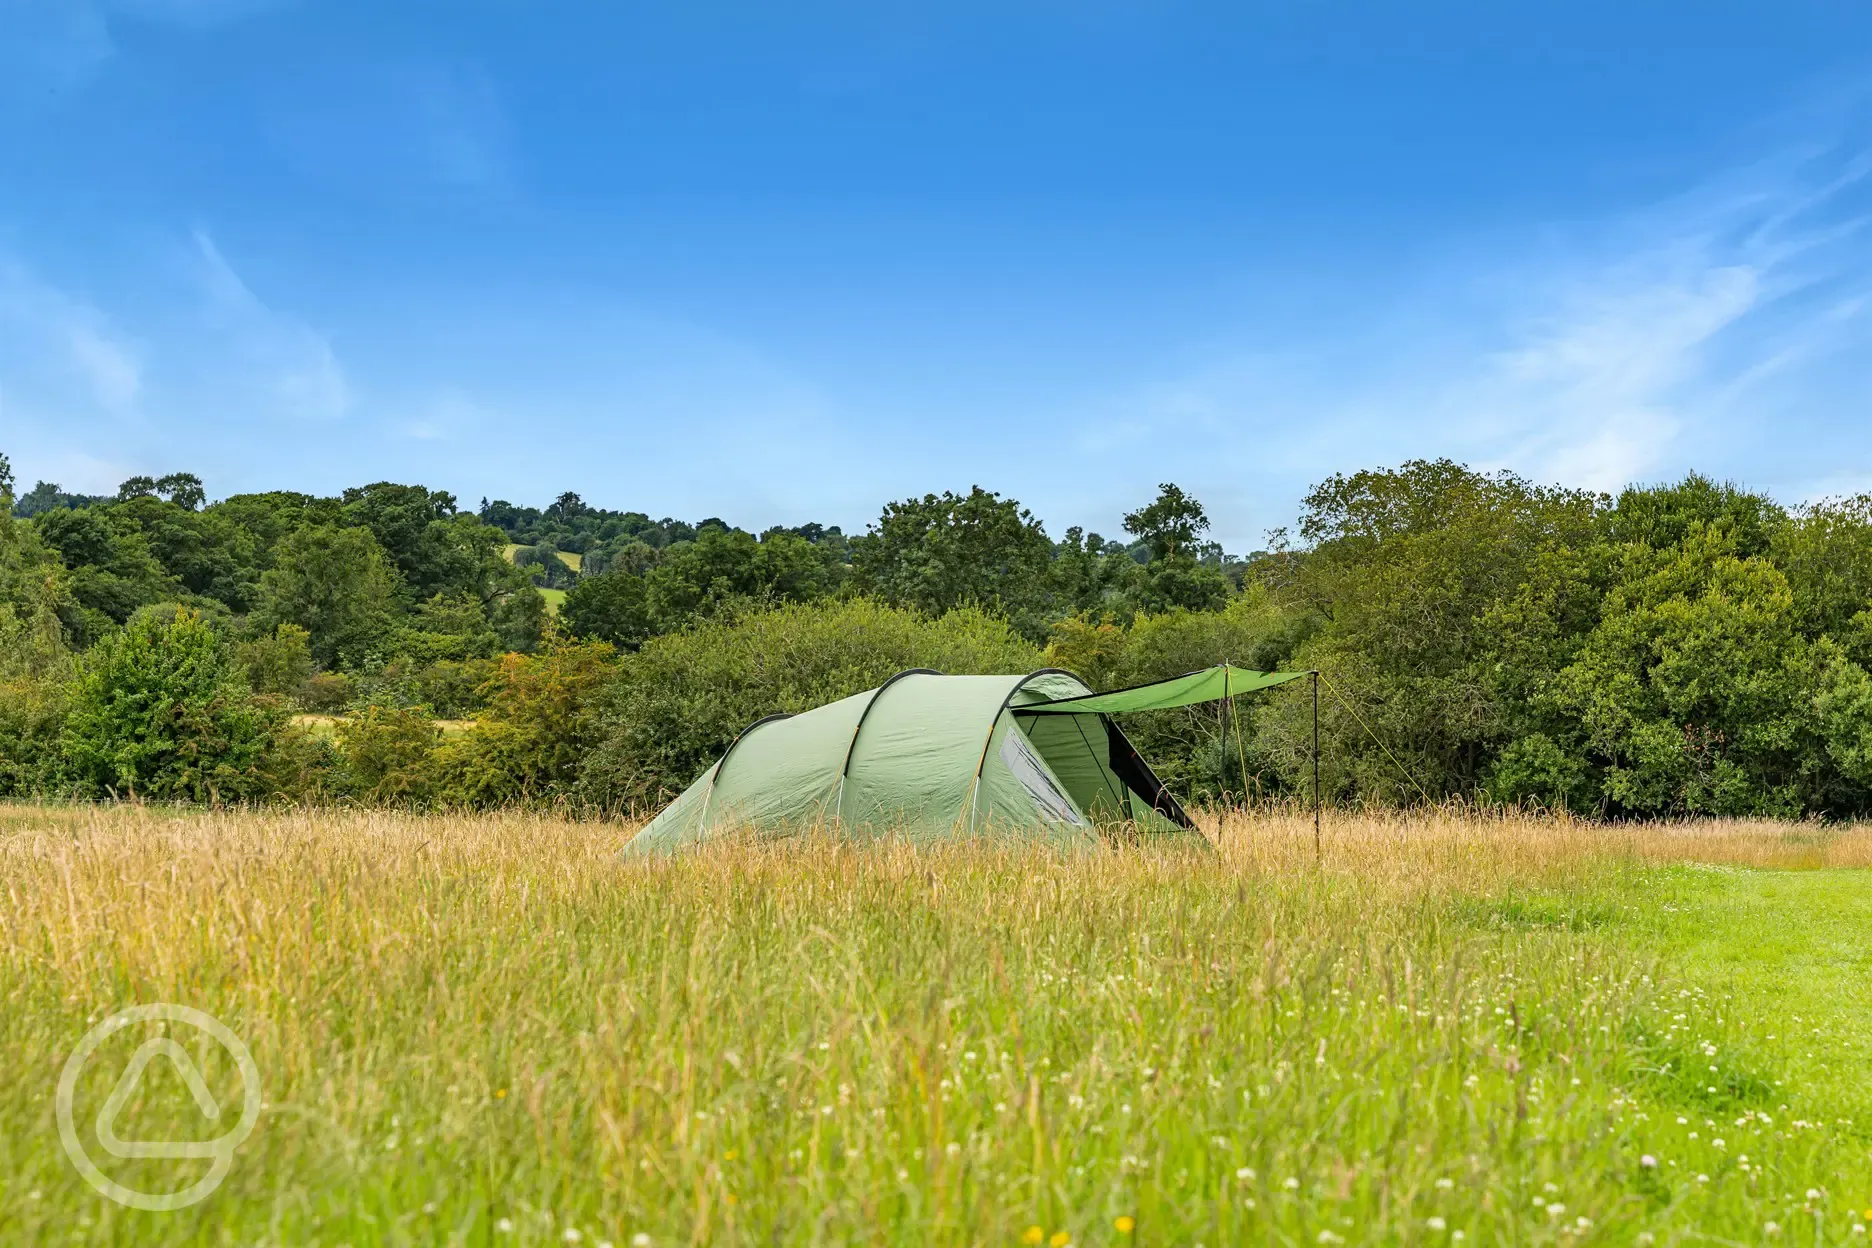 Wild meadow grass pitches